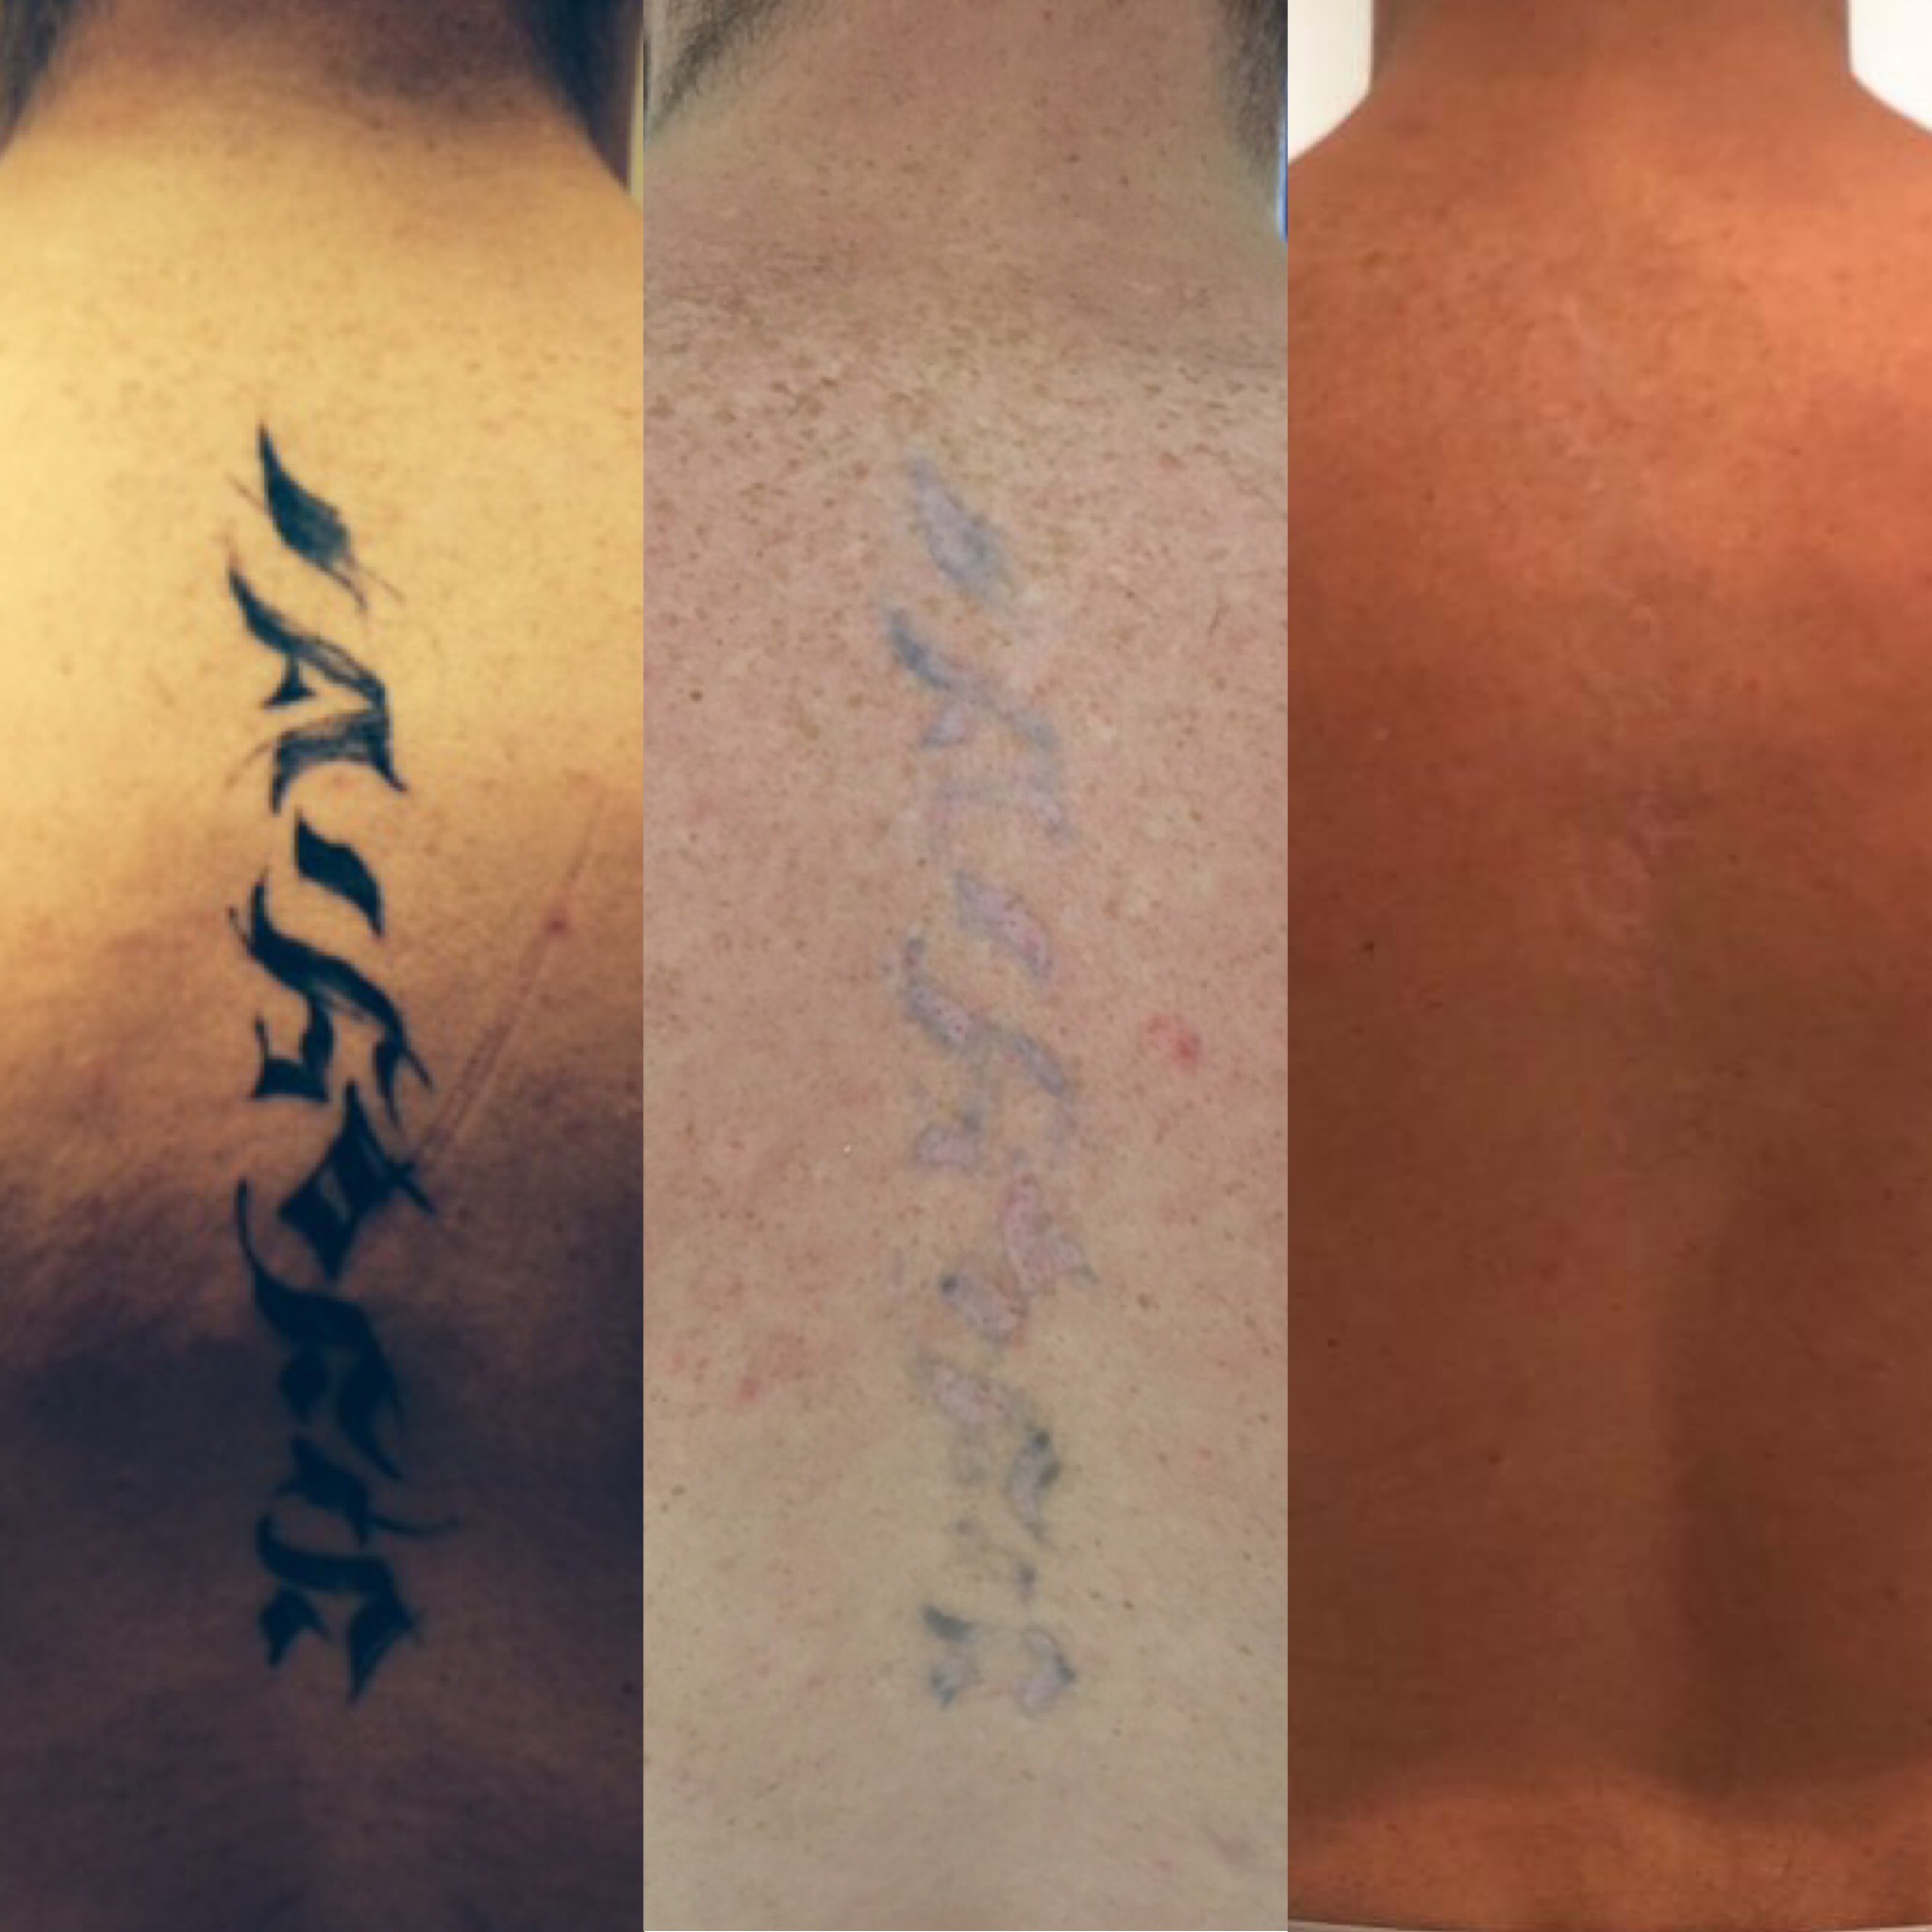 How to remove permanent tattoo without laser - Quora